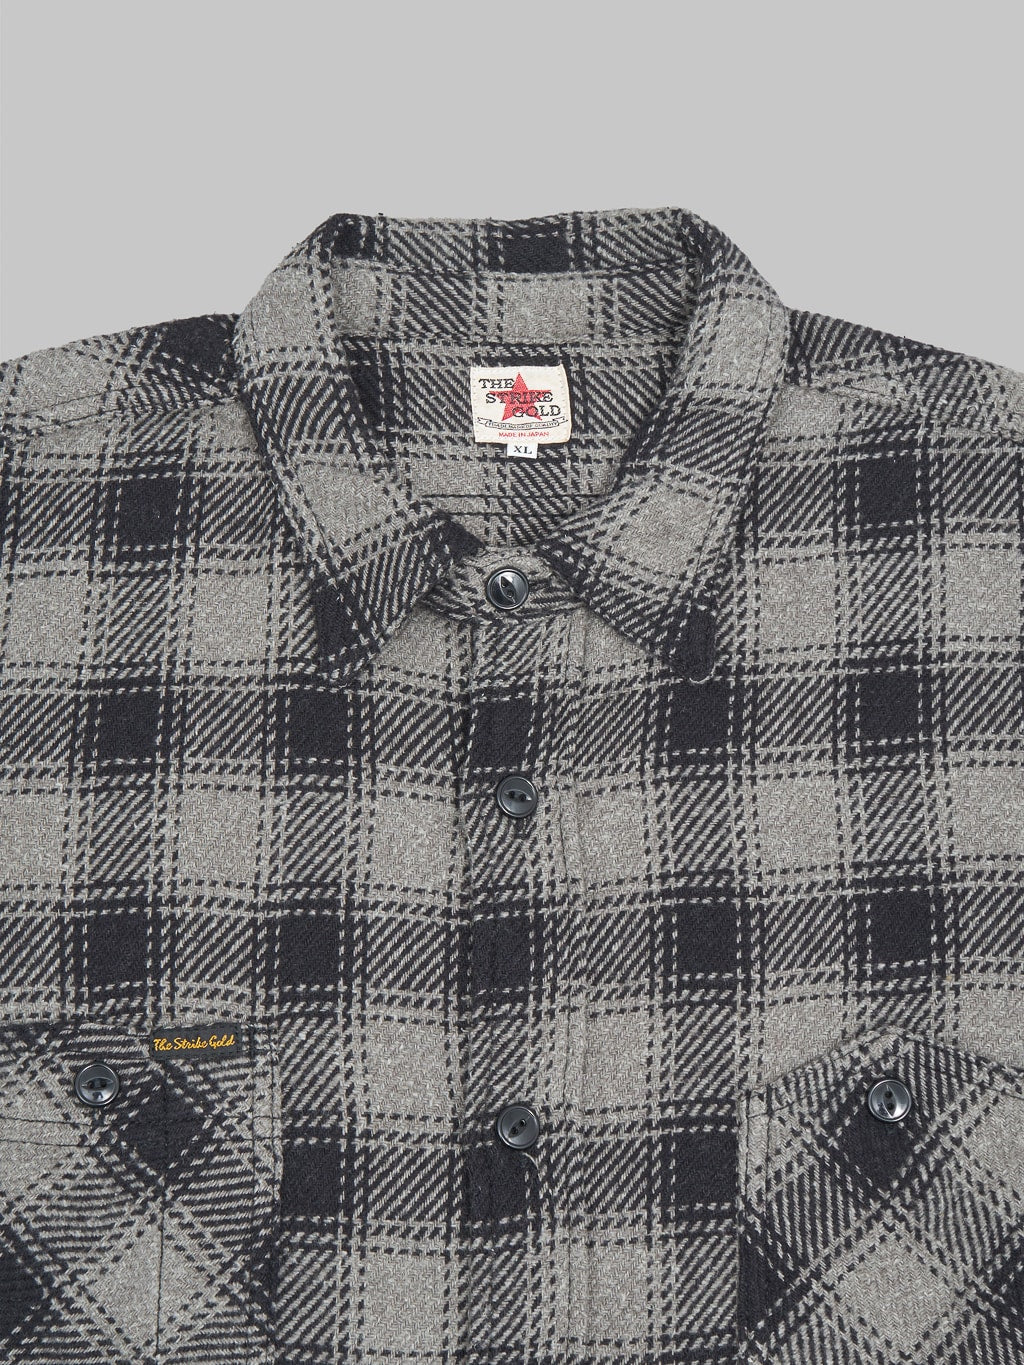 The Strike Gold SGS2203 Recycled Cotton Flannel Mixed Nep Check Work Shirt Grey